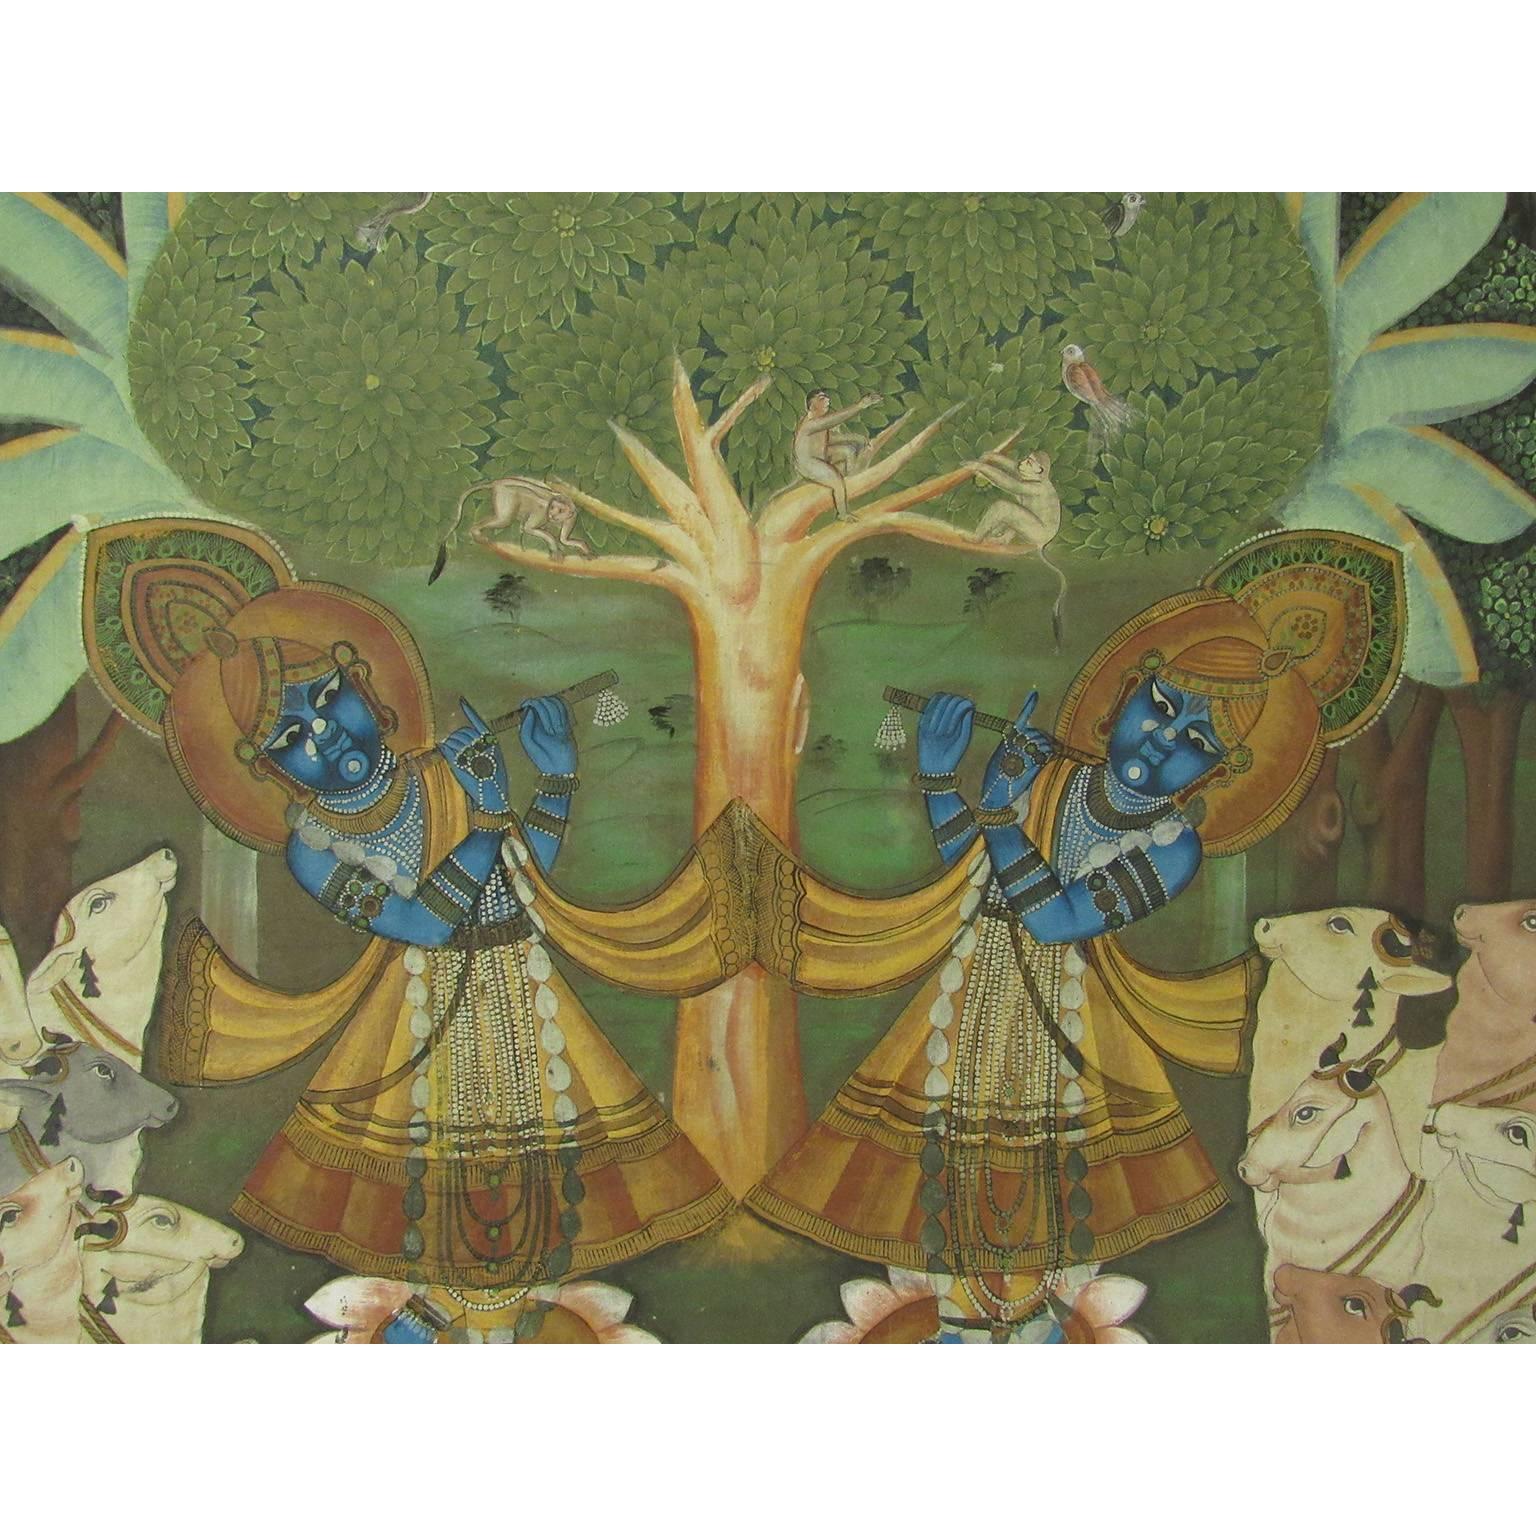 Very good and large 19th century east Indian Pichwai painting; Rajasthan, India; tempera on canvas mounted on cloth; depicting two Krishna figures surrounded by two herds of white cows and a central tree of life, surrounded by a vine border with